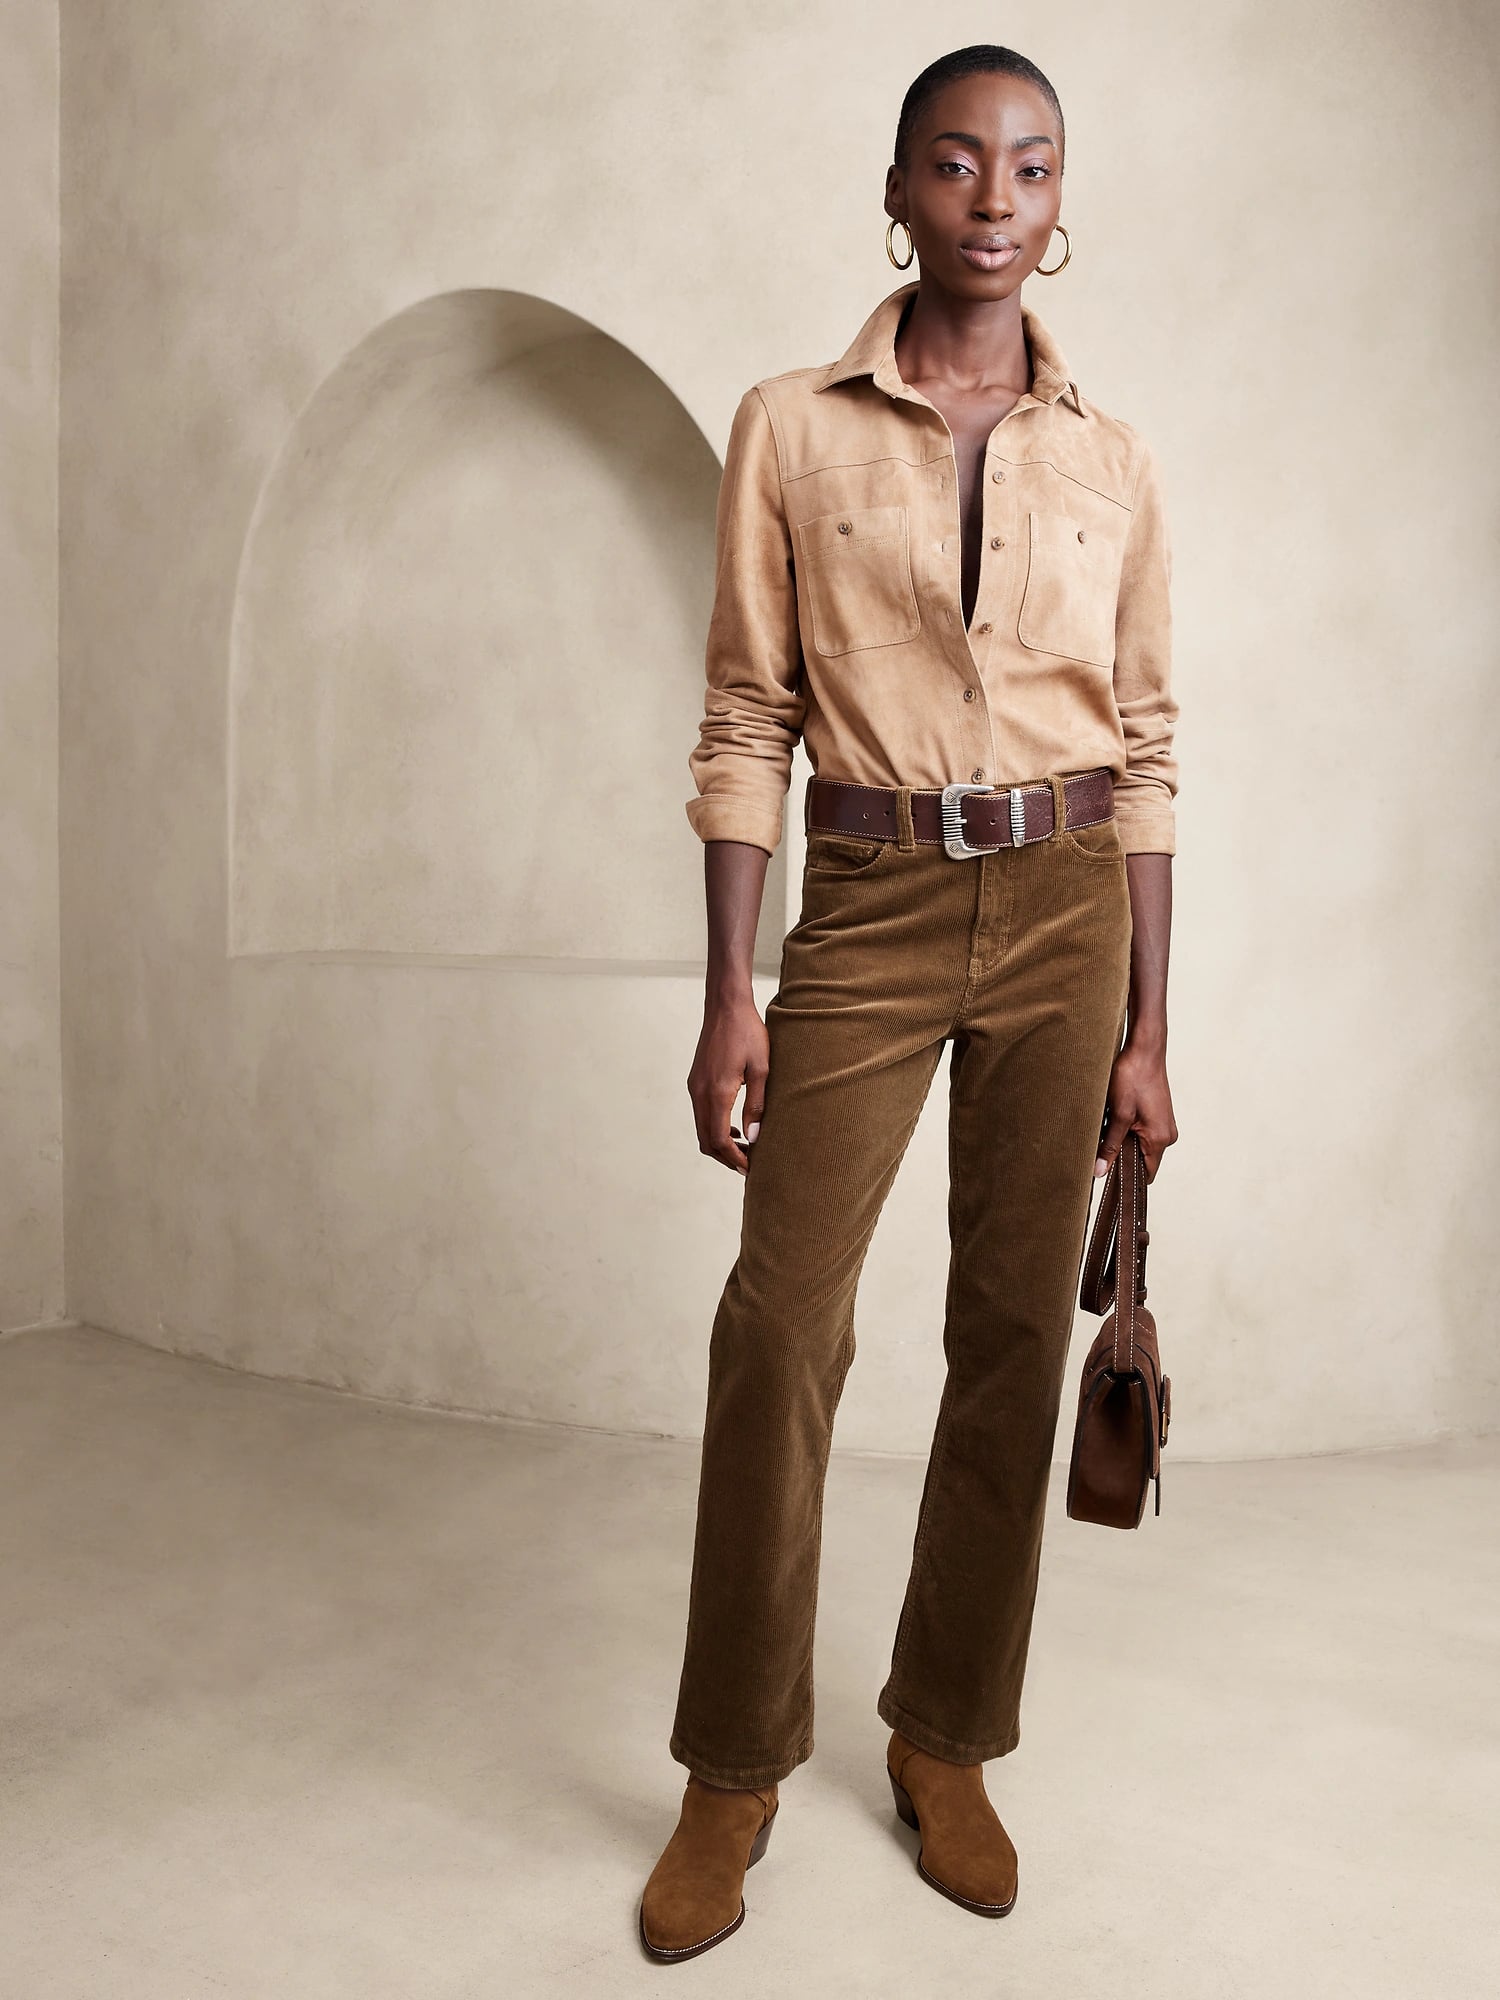 Best Brown Corduroy Pants: Banana Republic The Straight Corduroy Pant, 13 Corduroy  Pants Our Editors Are Loving For Fall